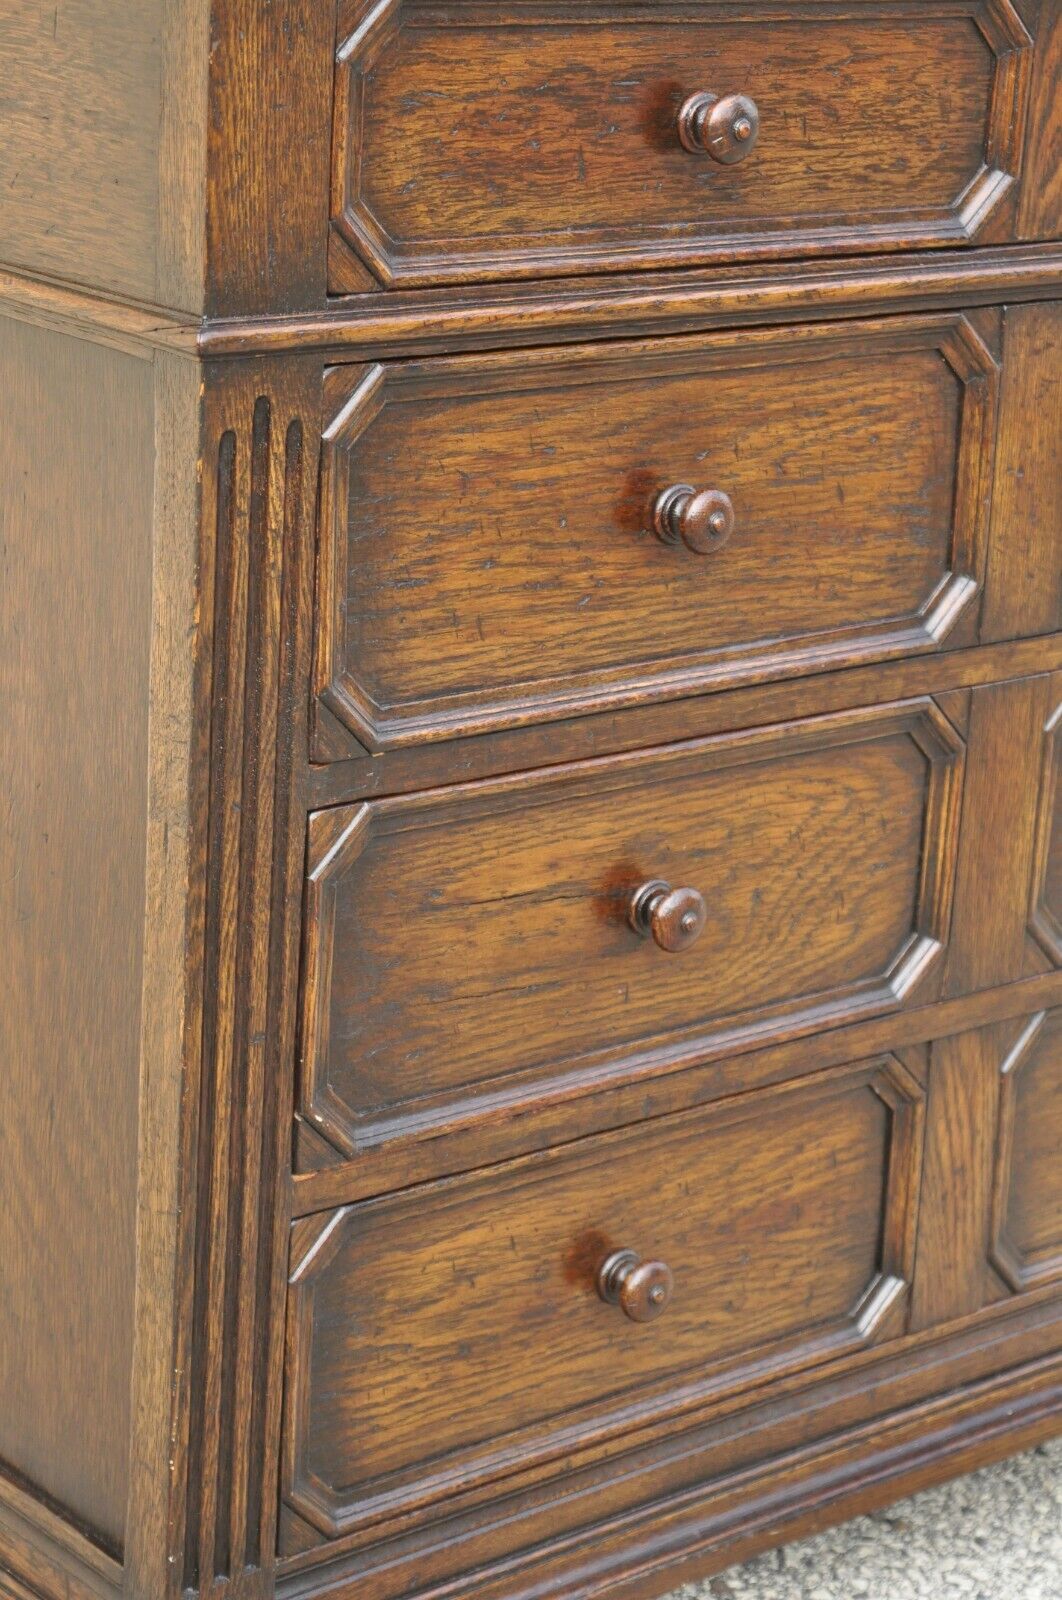 Antique Oak Jacobean Style Carved Wood Chest of Drawers Low Chest Dresser